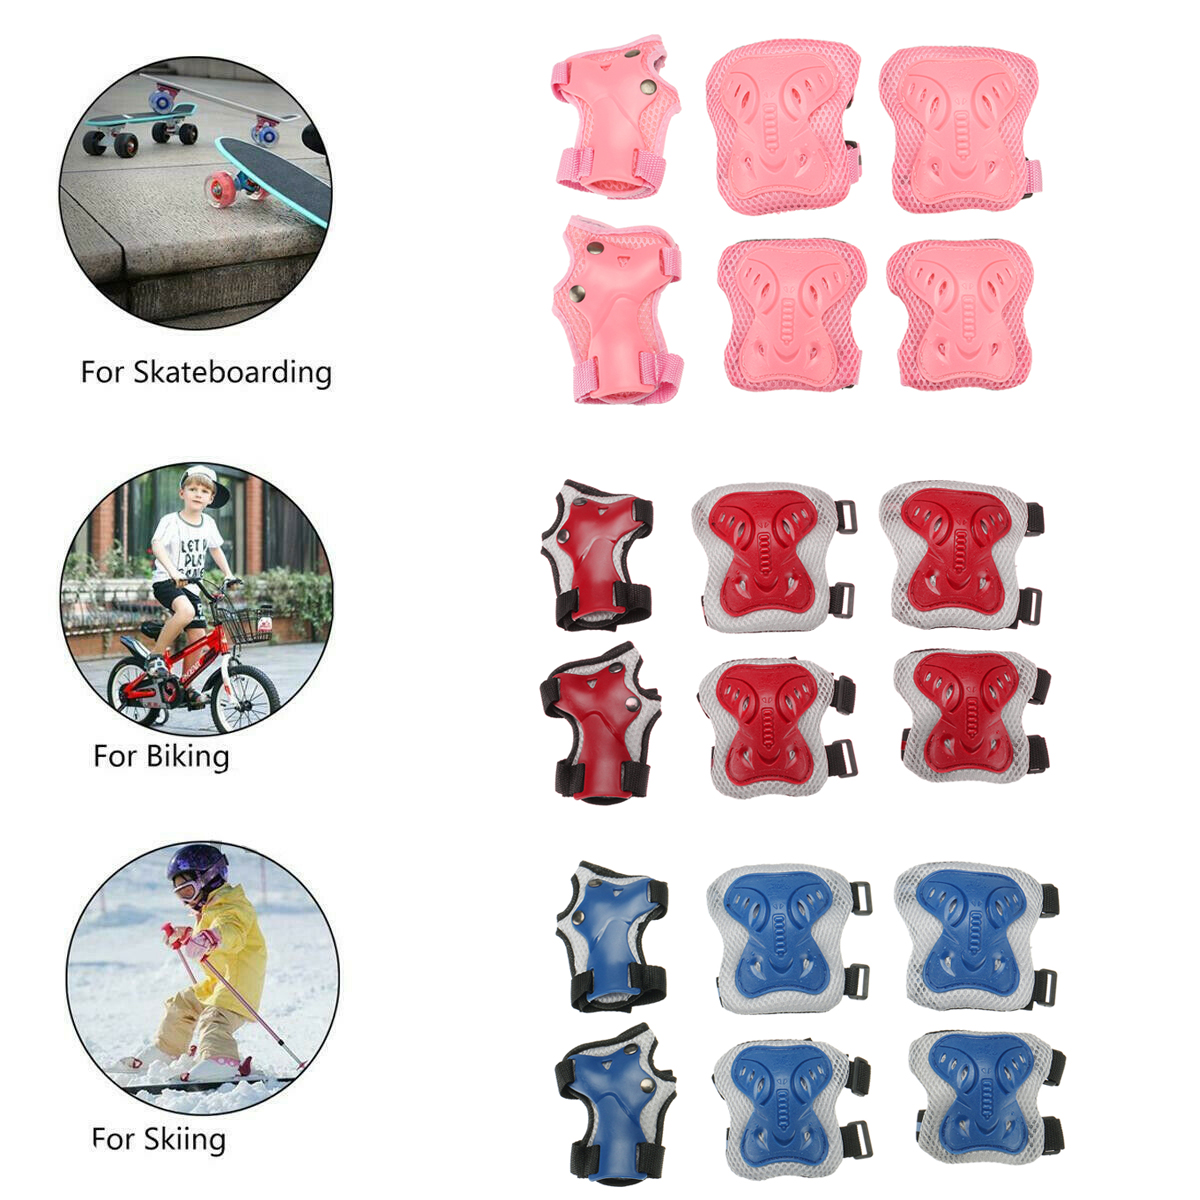 6PCS-Set-Adult-Children-KneeElbowWrist-Pads-Protective-Gears-for-Skateboard-Bicycle-Ice-Inline-Rolle-1796809-4